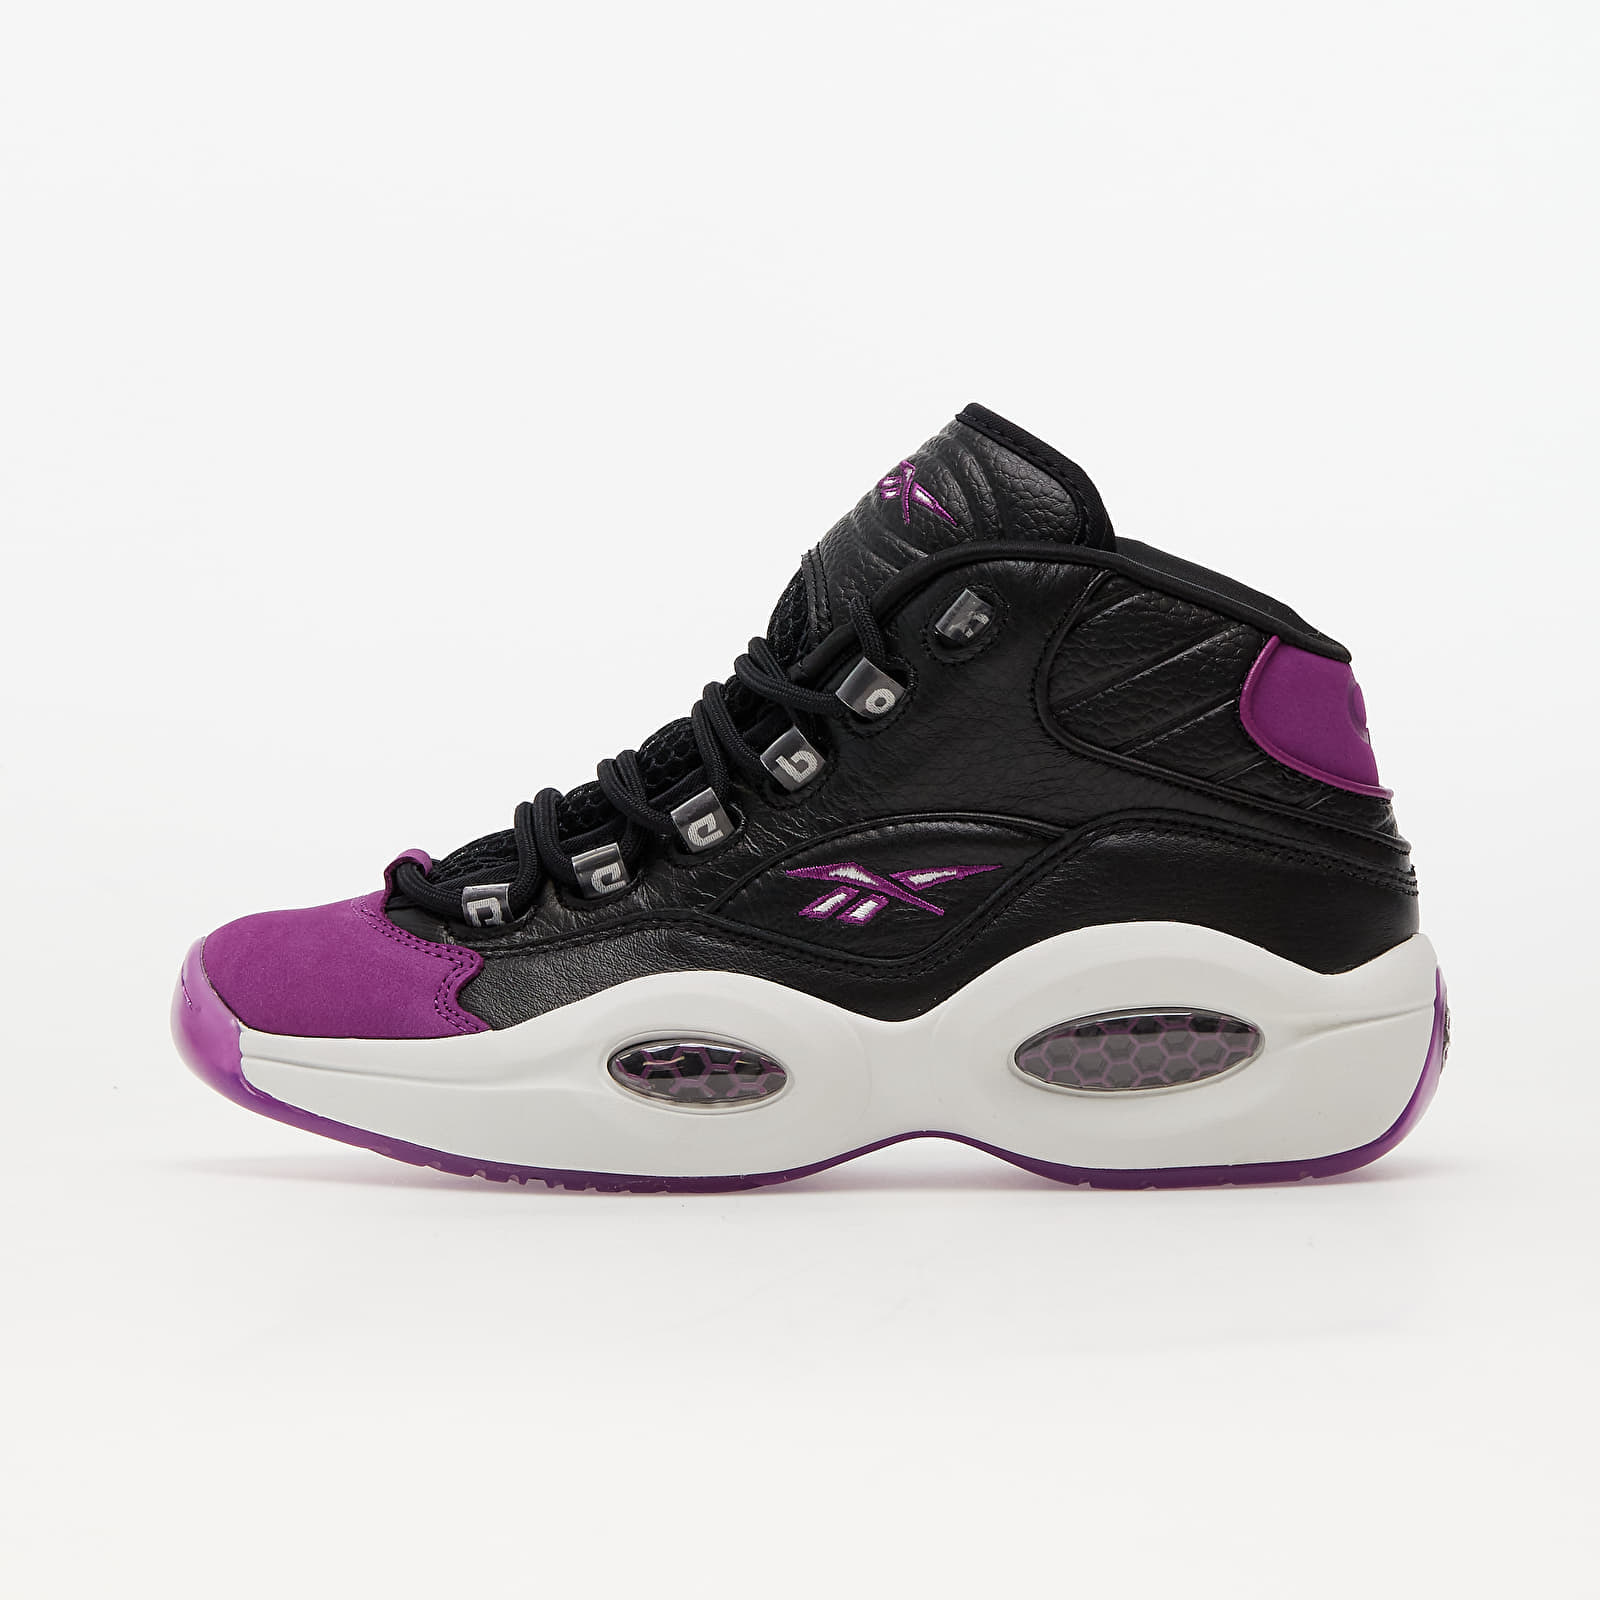 Men's sneakers and shoes Reebok Question Mid Core Black/ Aubergine/ Pure Grey